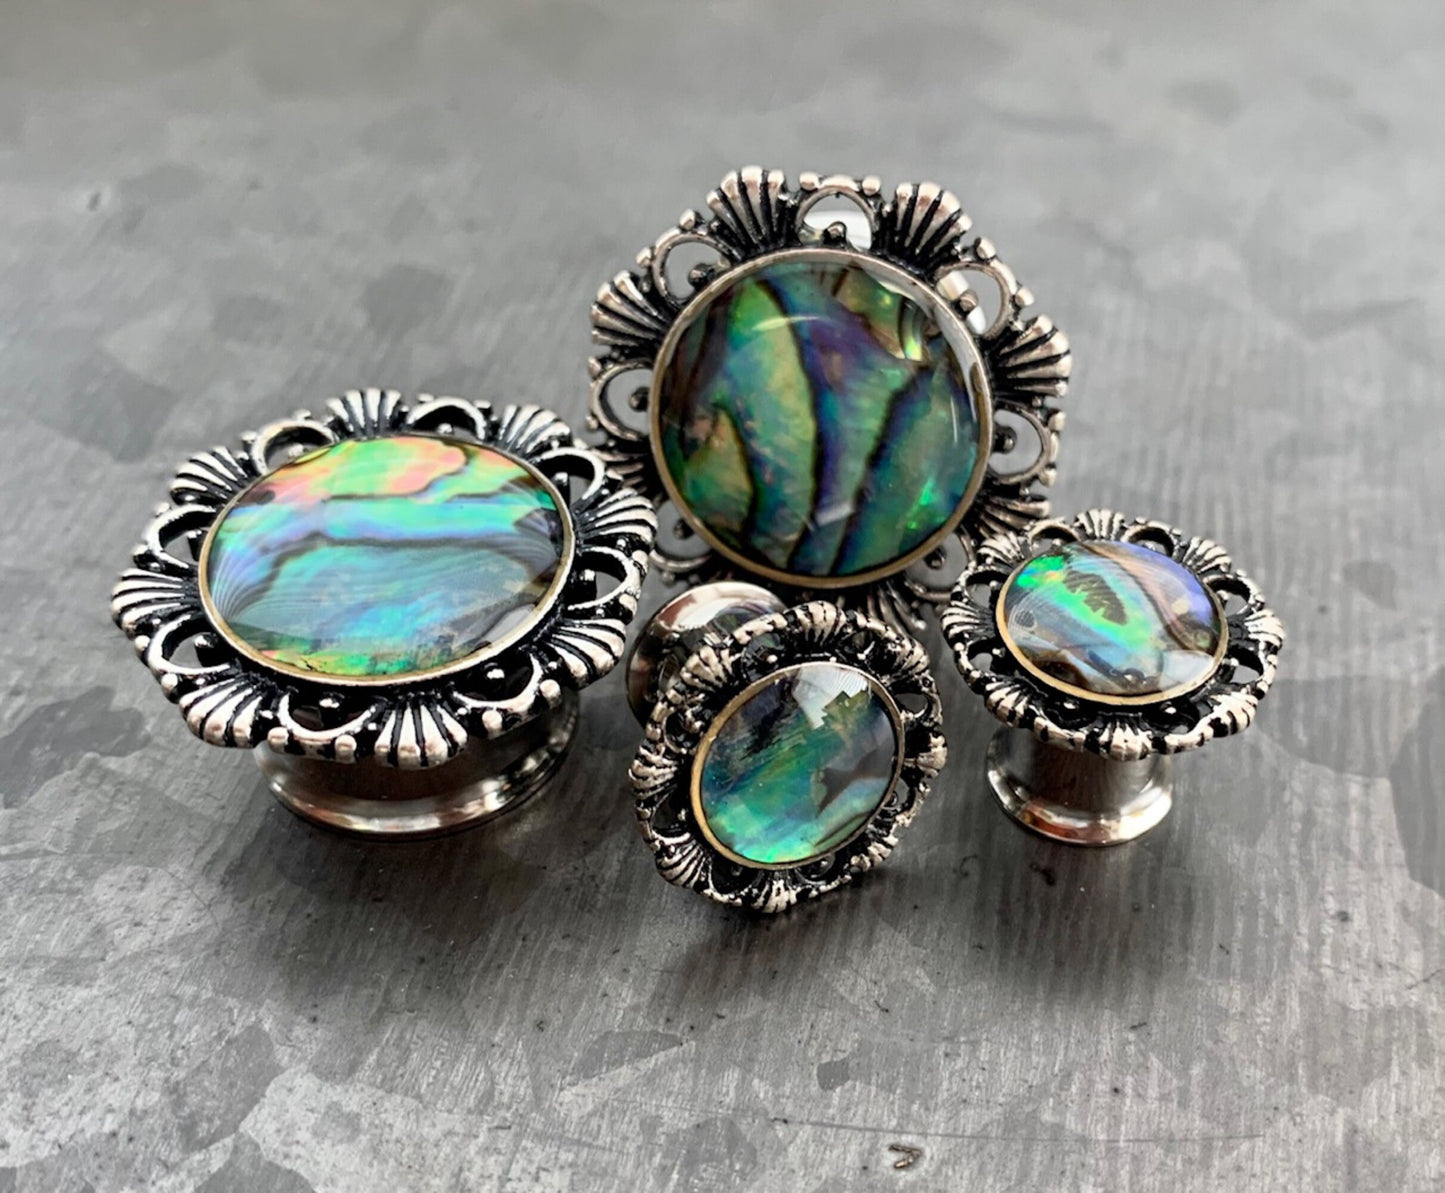 PAIR of Stunning Abalone Antique Silver Flower Double Flare Tunnels/Plugs - Gauges 2g (6mm) thru 5/8" (16mm) available!